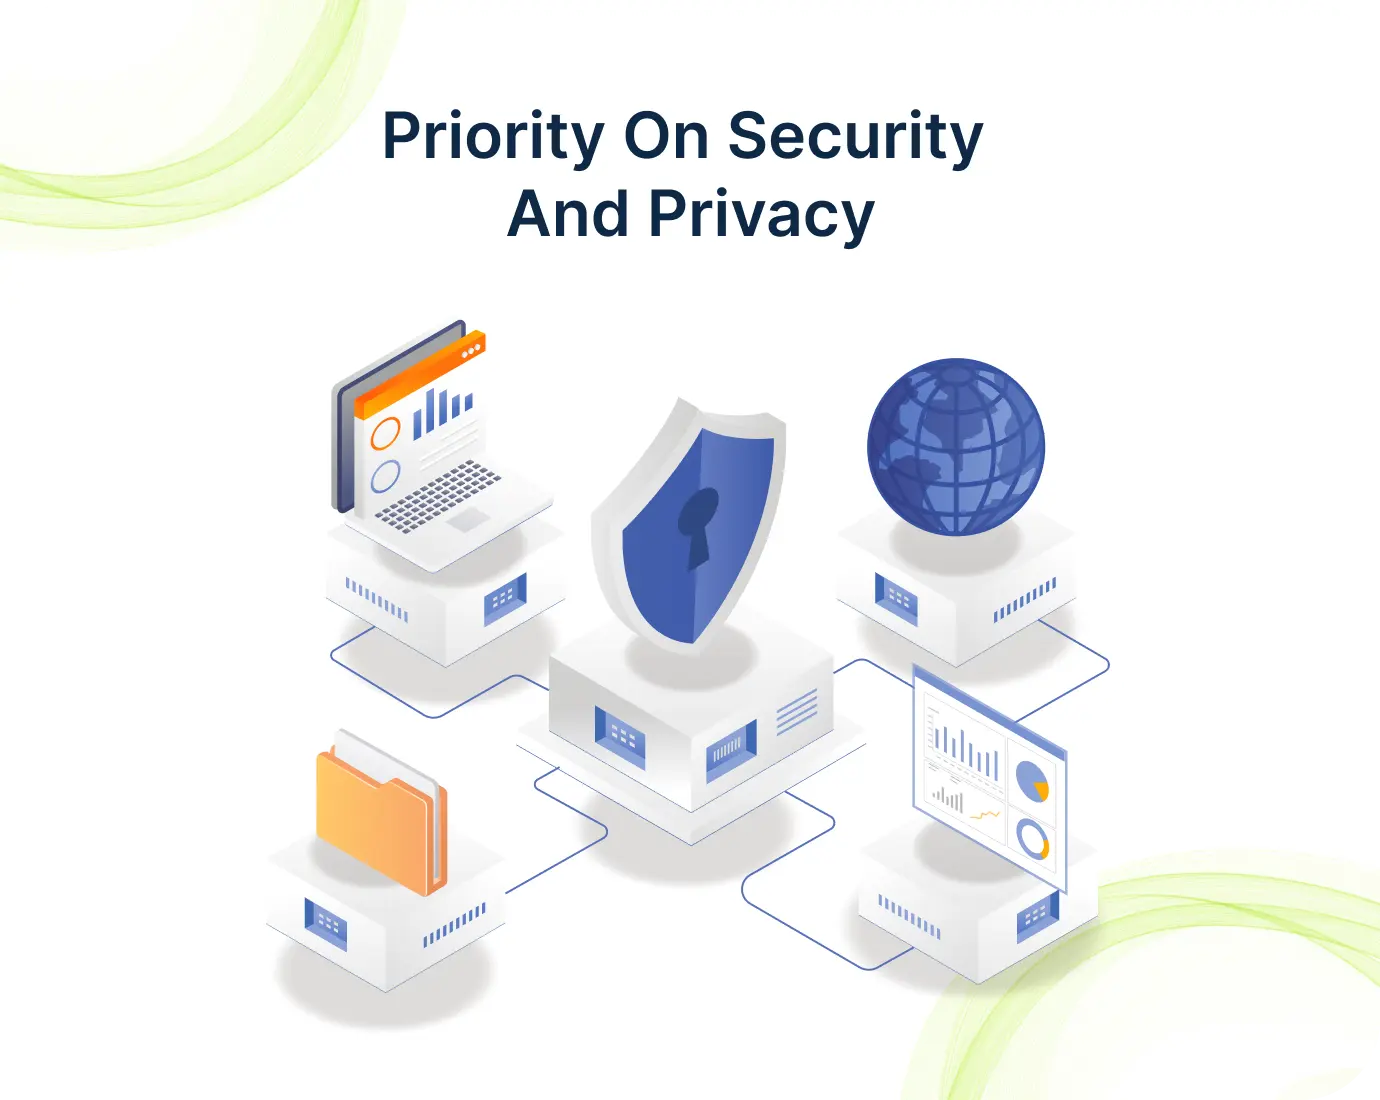 Priority on Security and Privacy